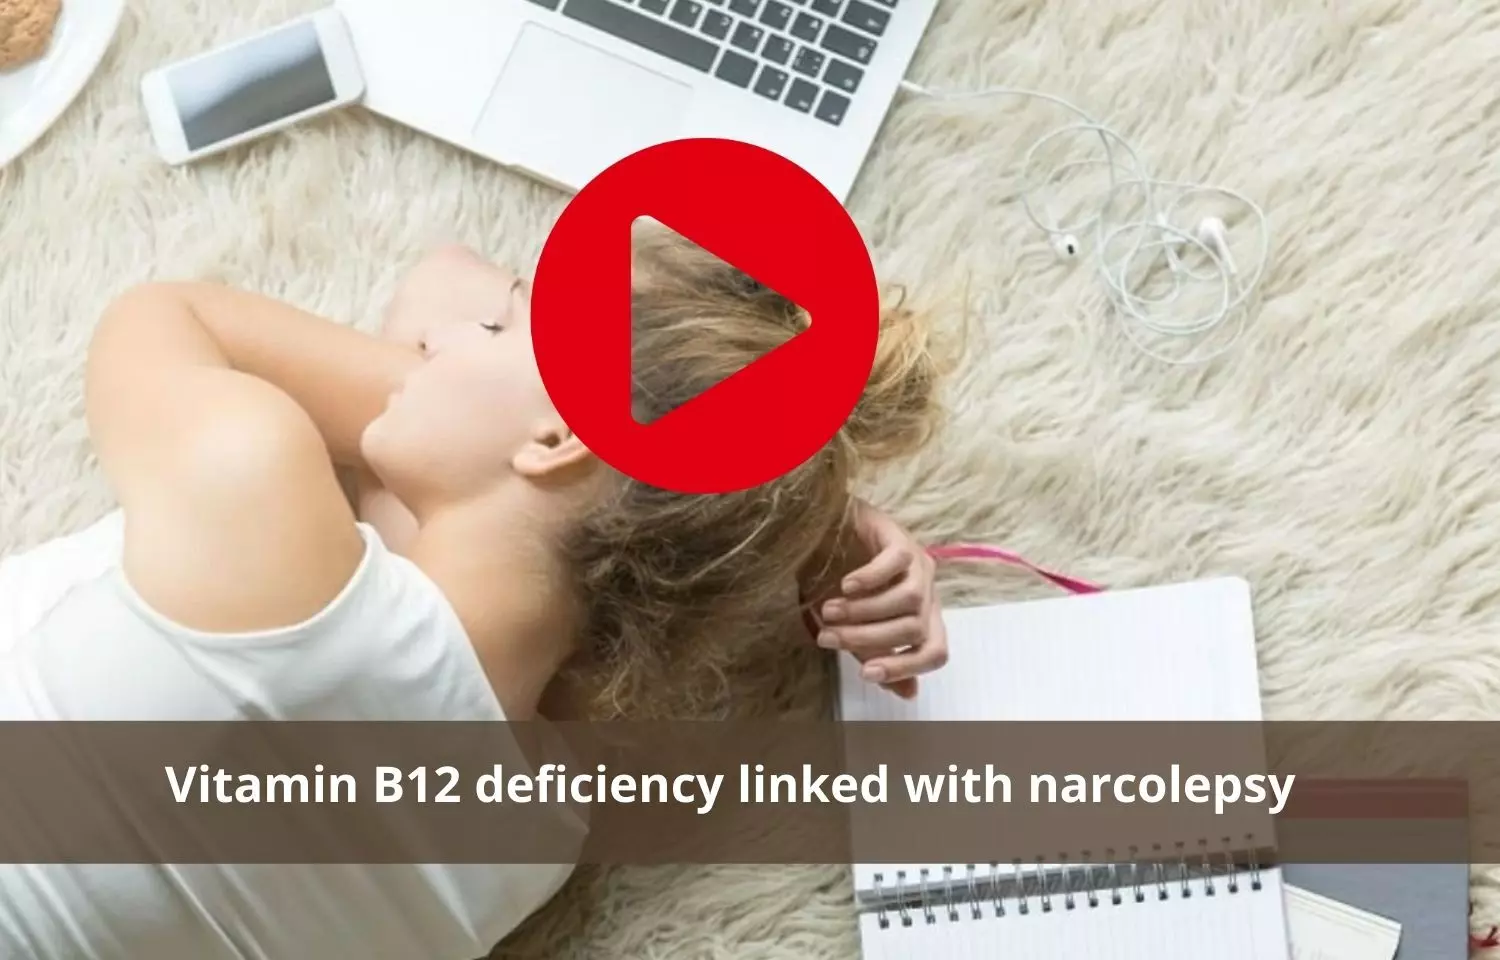 Vitamin B12 deficiency and narcolepsy interlinked